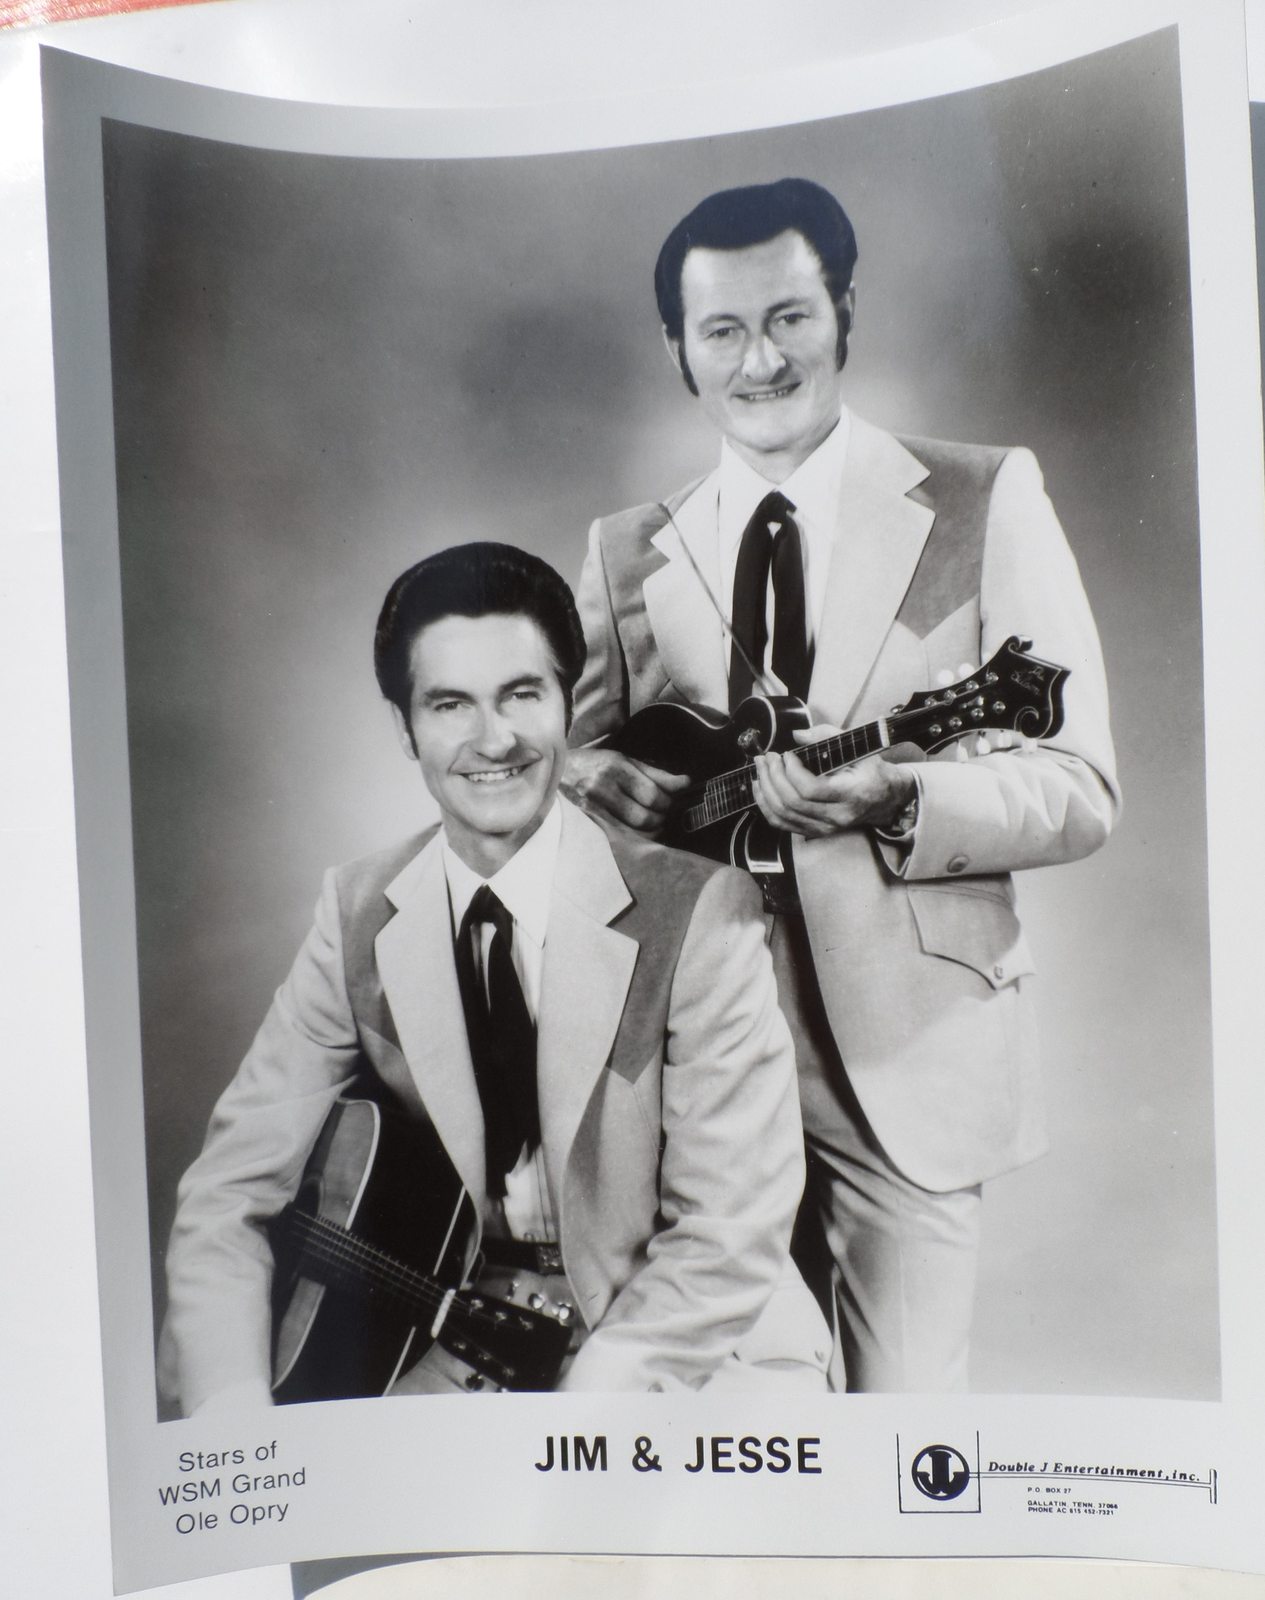 Primary image for JIM & JESSE Vintage Promo Photo 8*10 Stars of WSM Grand Ole Opry Double J Entert